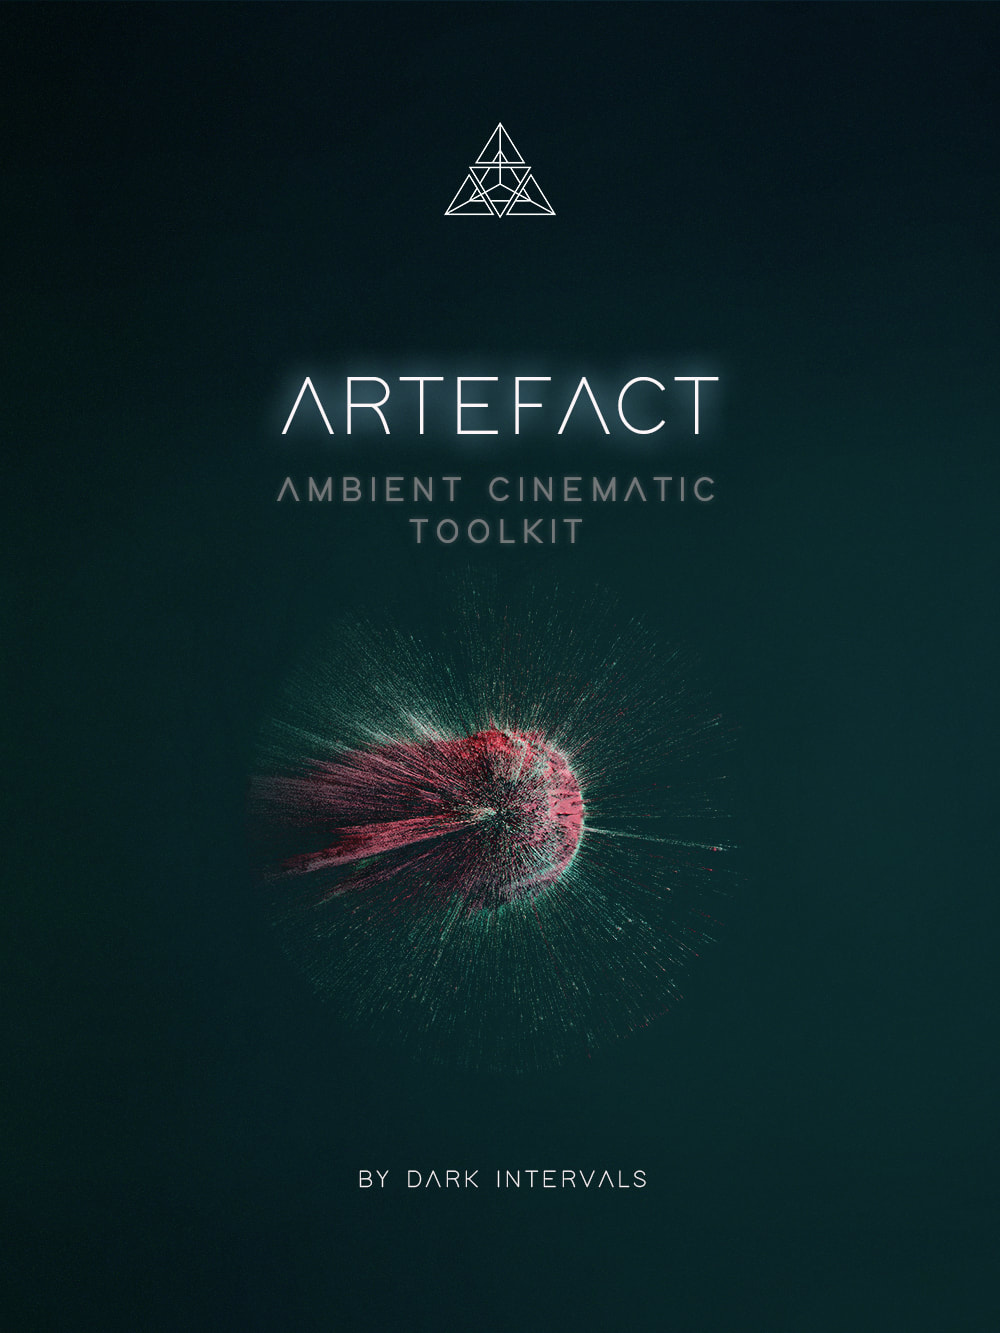 Ambient cinematic toolkit